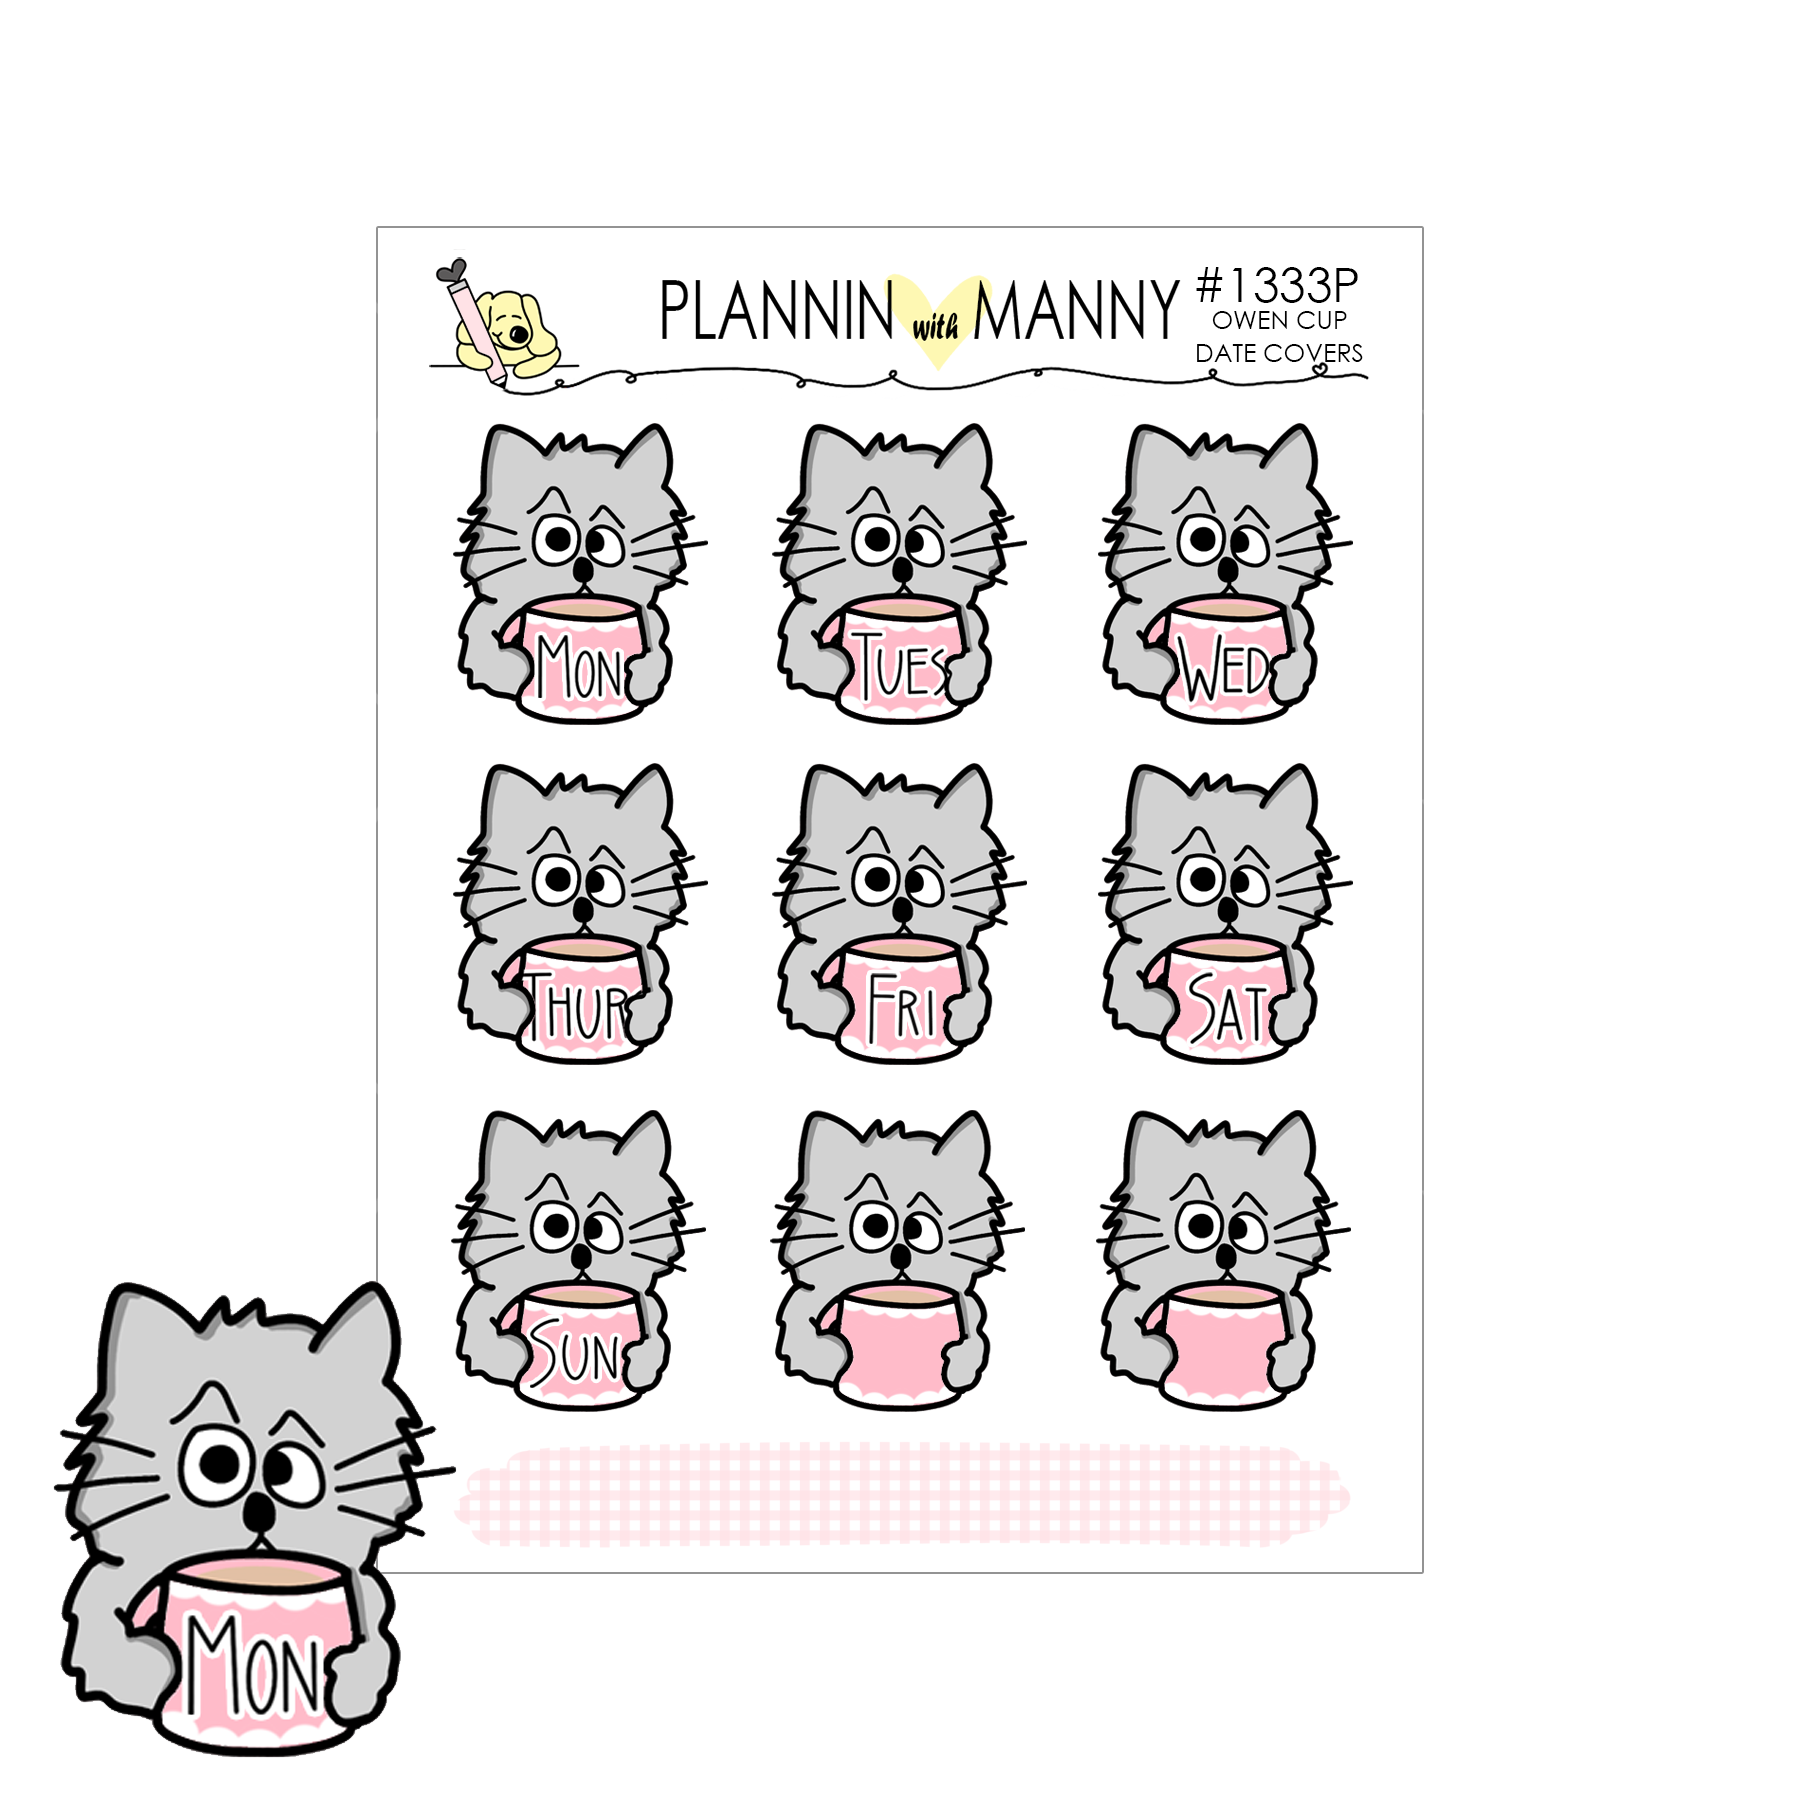 1333P Pink Owen Cup Day Planner Stickers